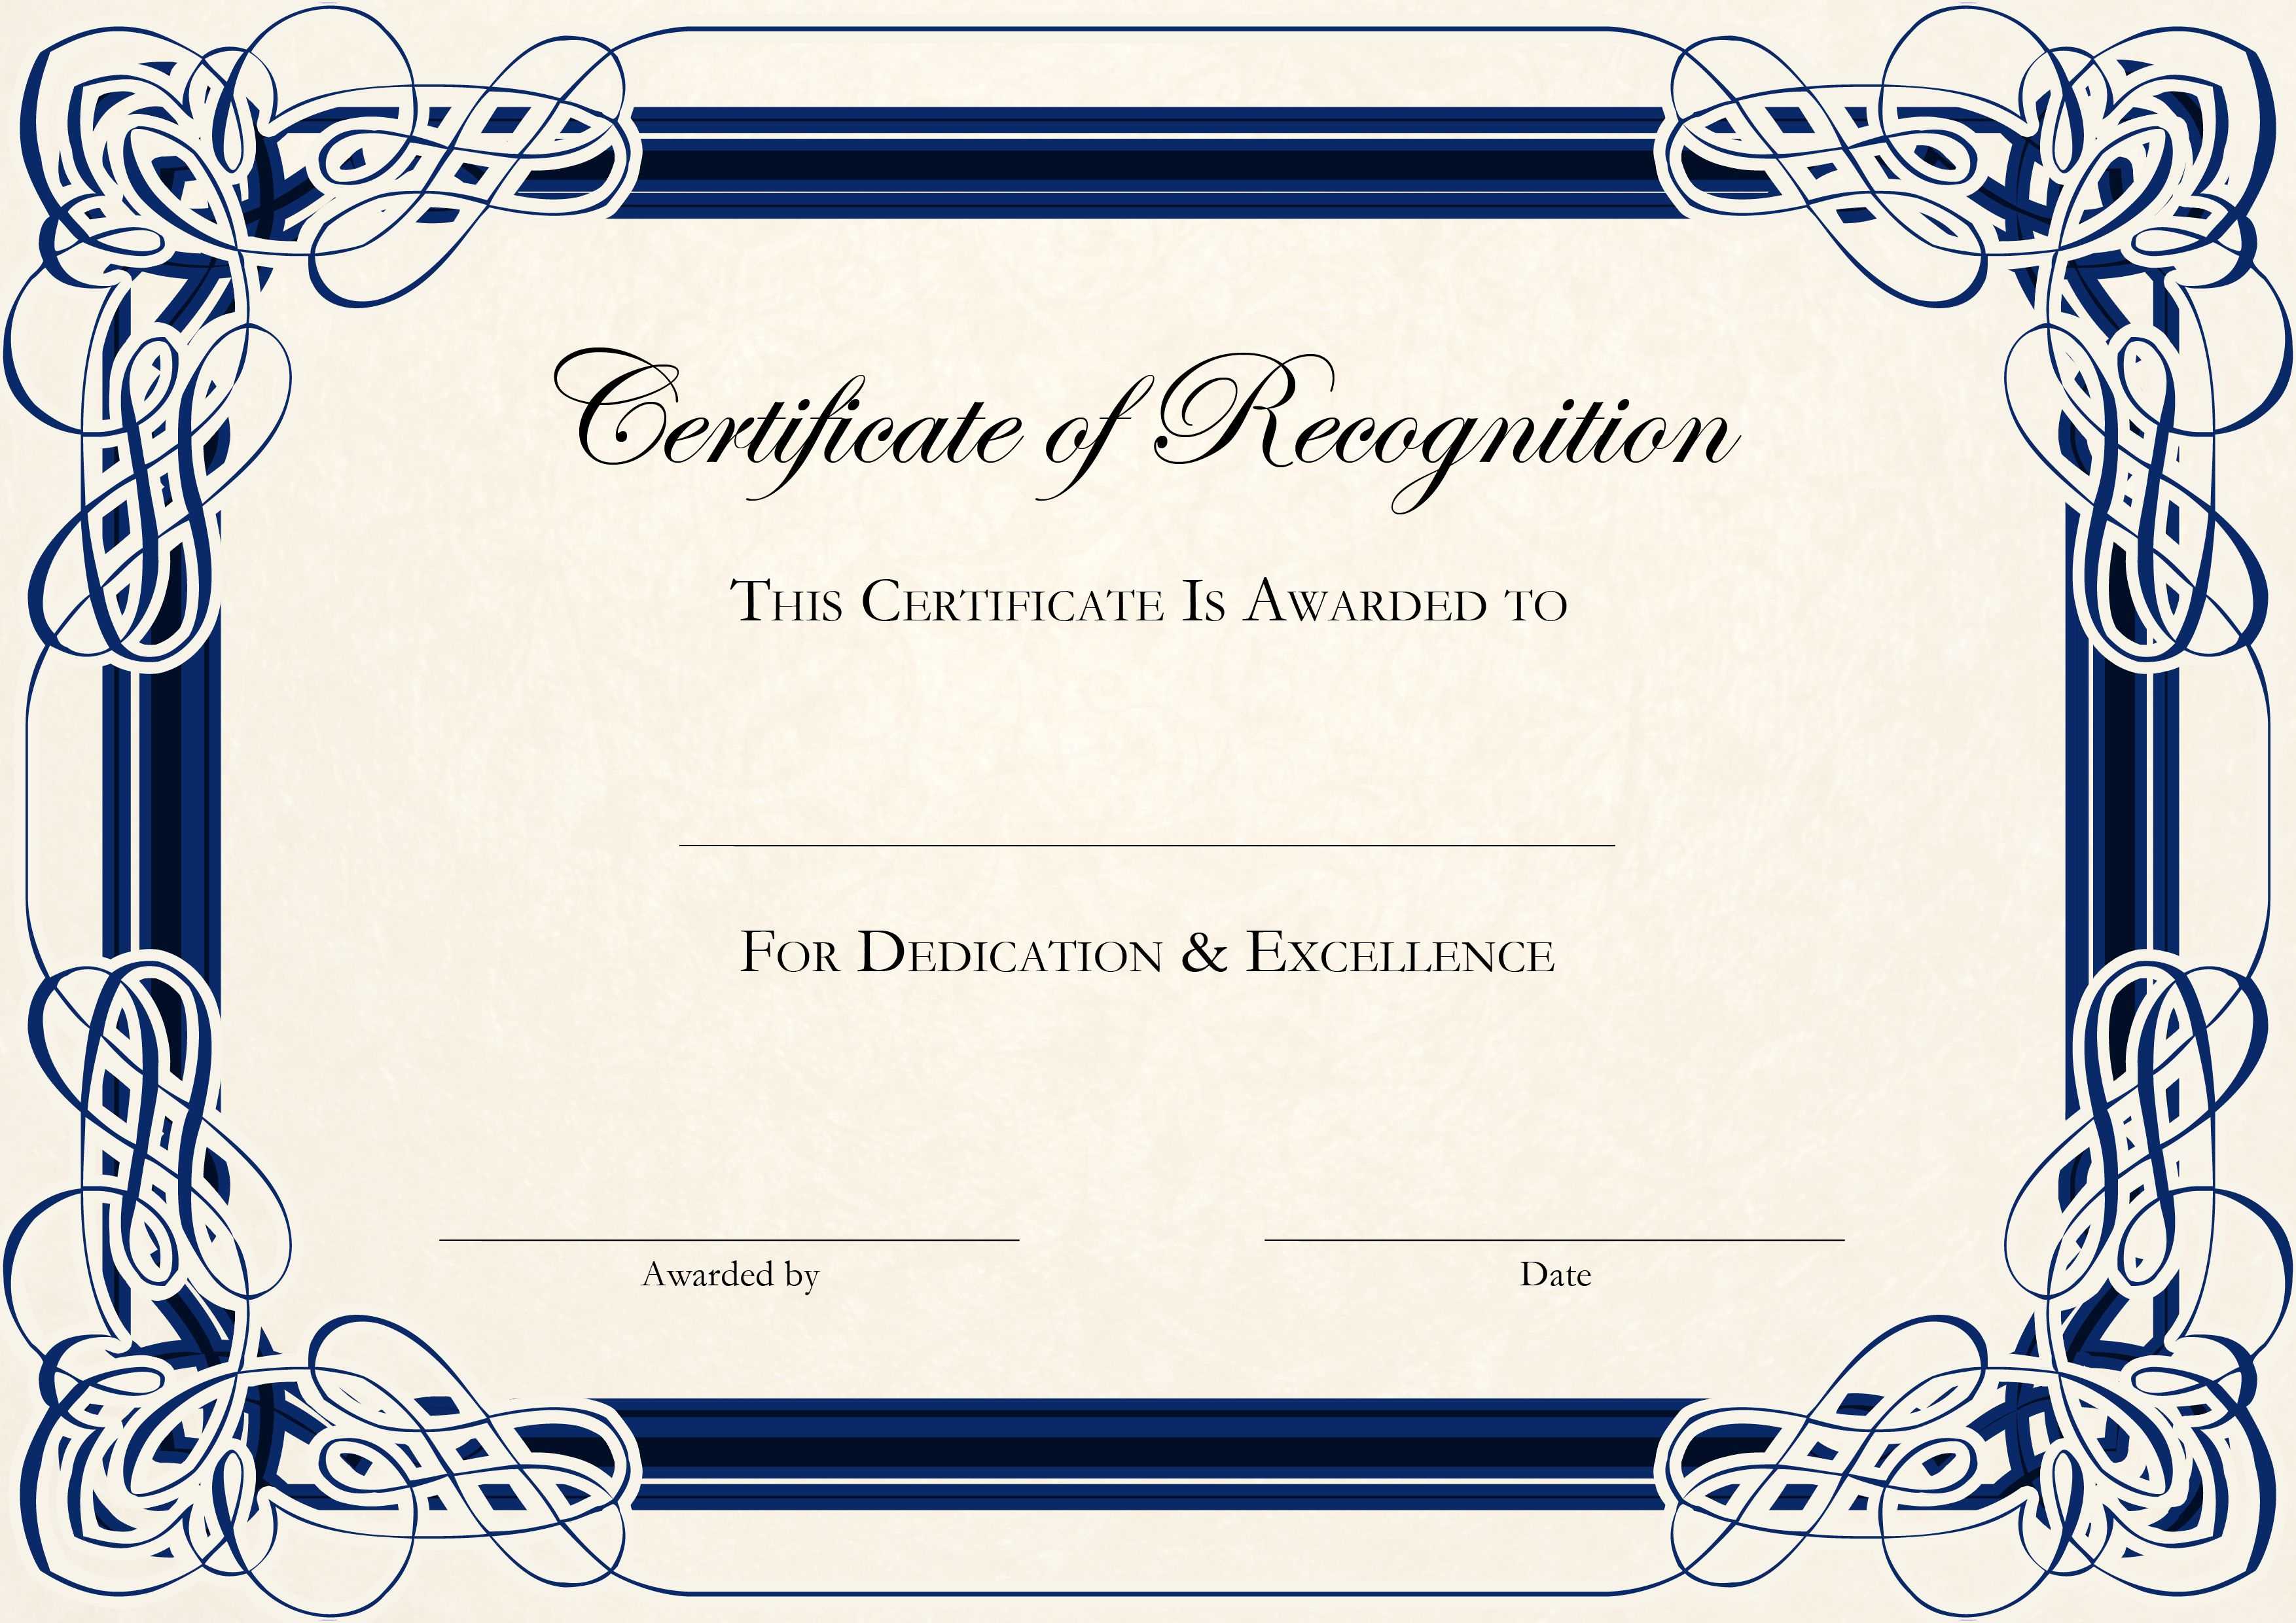 Sports Cetificate | Certificate Of Recognition A4 Thumbnail Throughout Template For Recognition Certificate